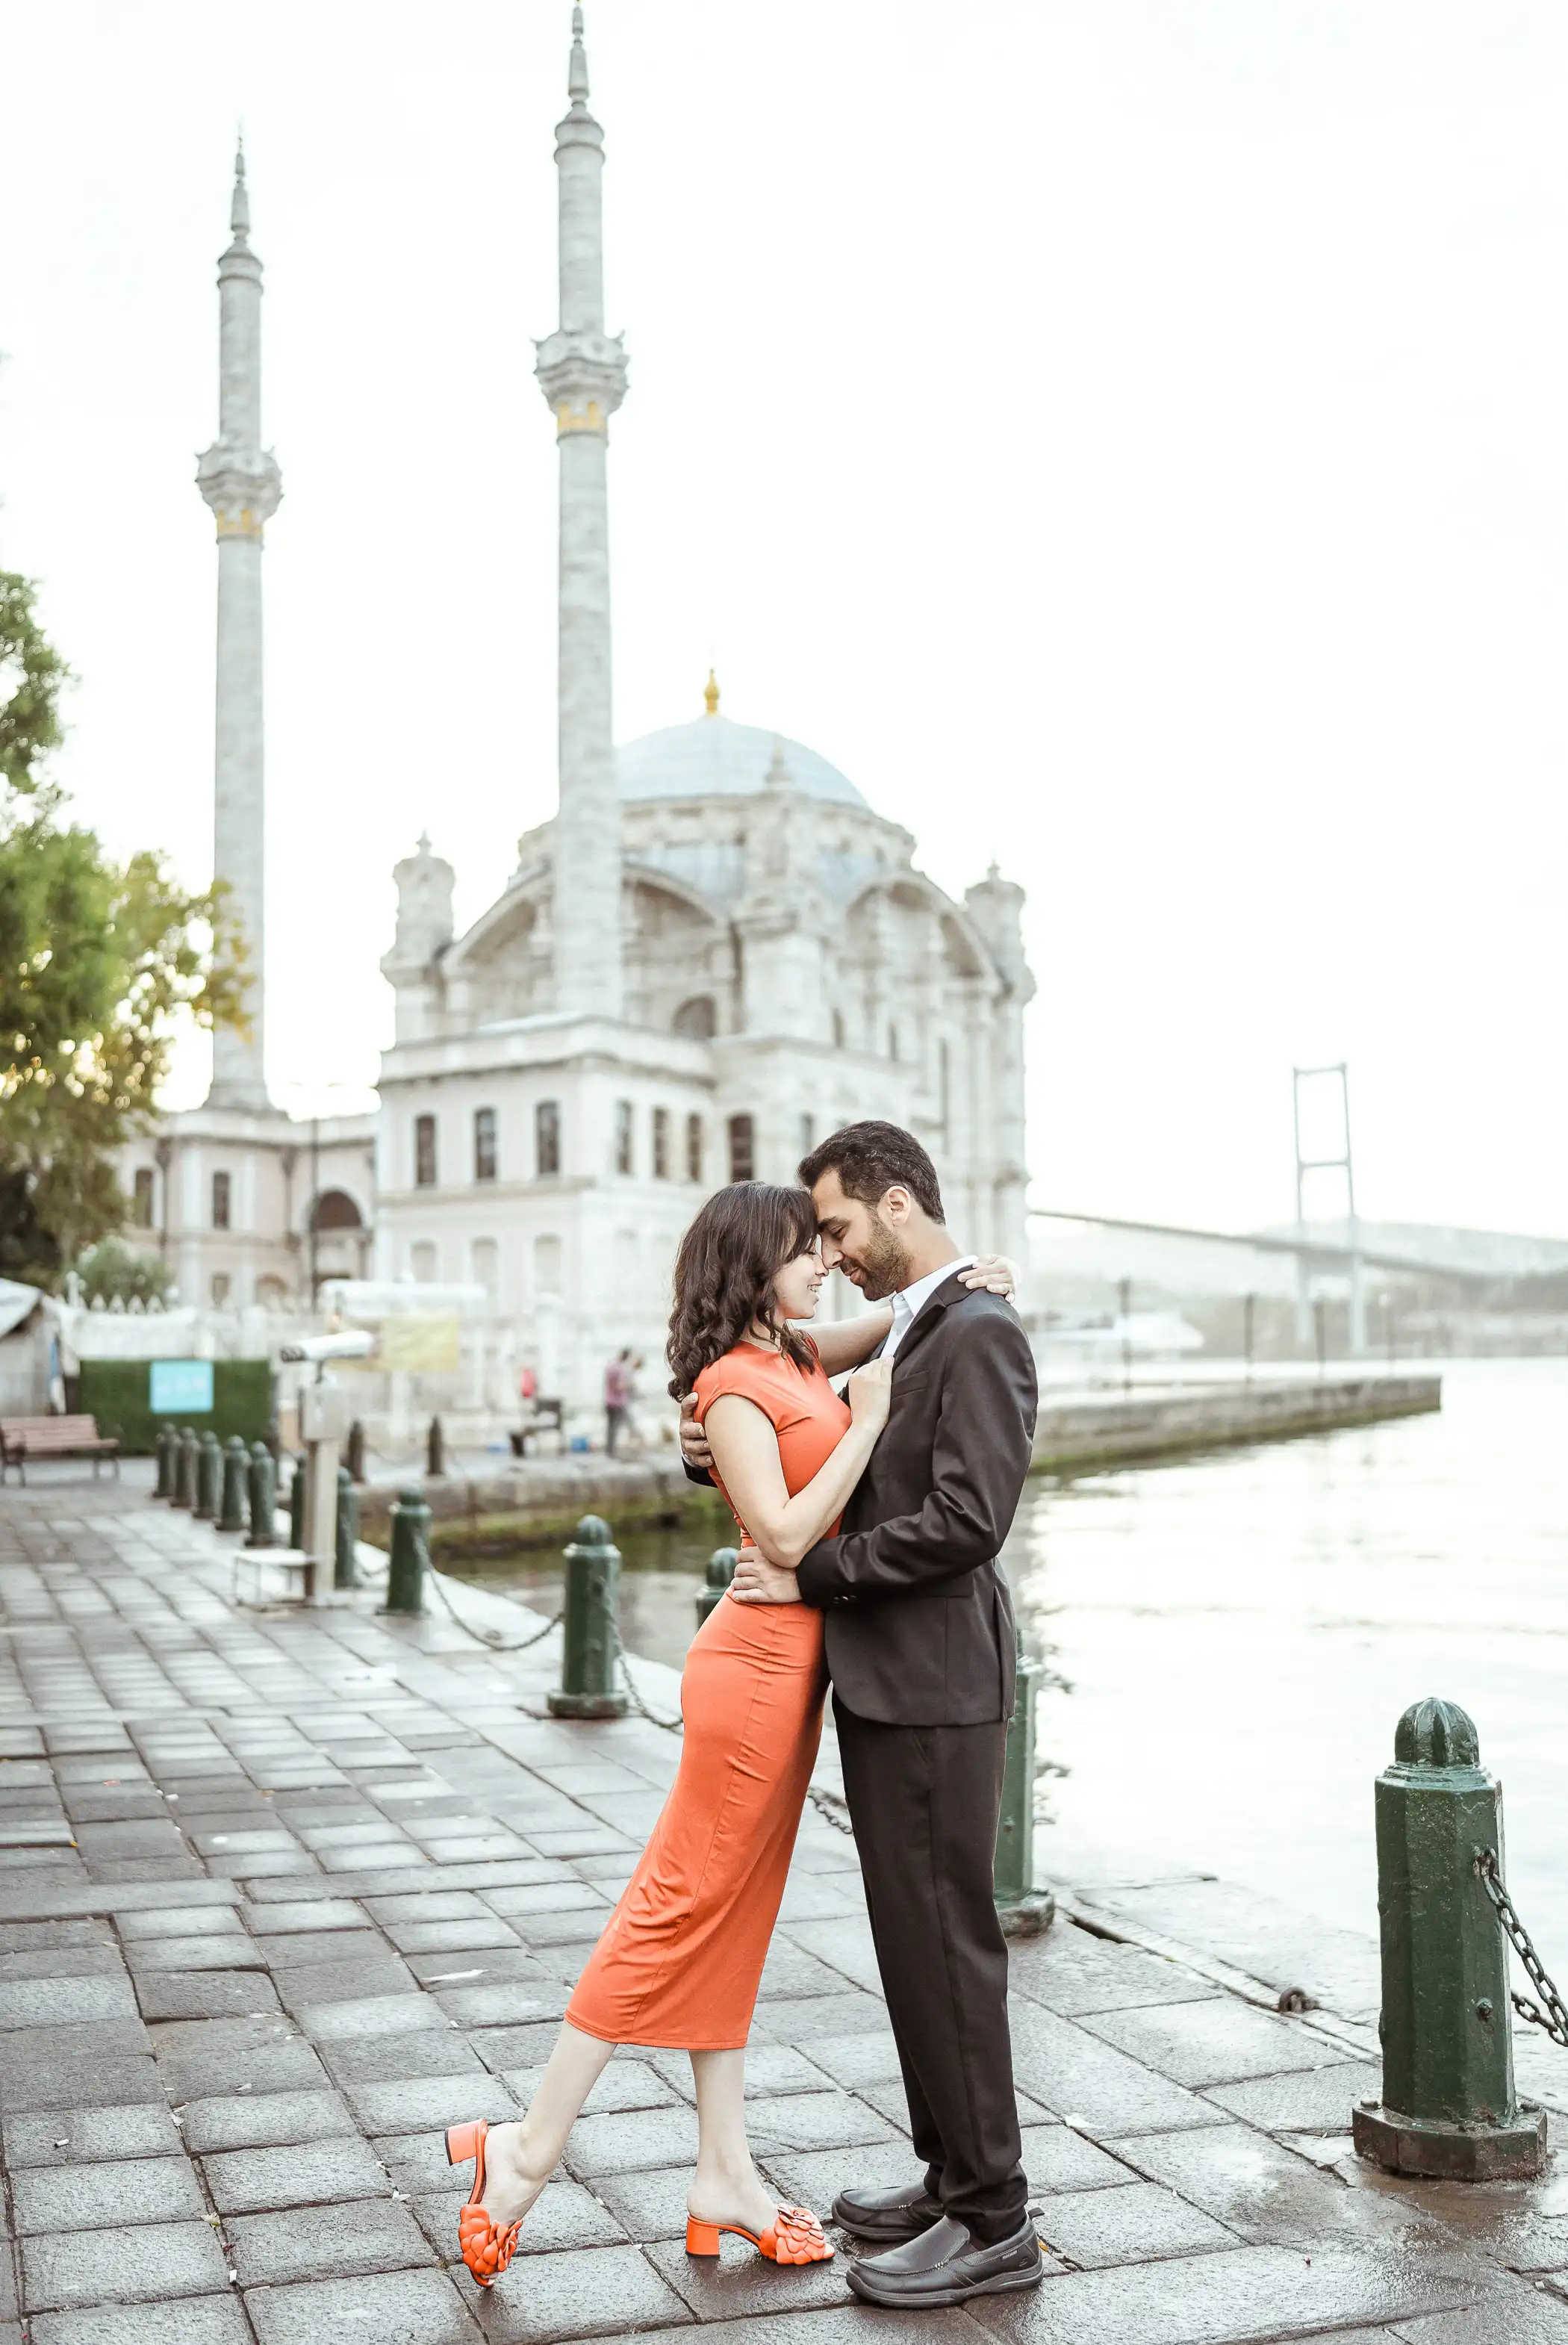 As the morning light bathes Ortaköy Mosque, you’ll strike poses against its timeless beauty. The absence of crowds allows for intimate and serene photos. Whether you’re celebrating a special occasion or simply want stunning vacation shots, this private photoshoot caters to your preferences.